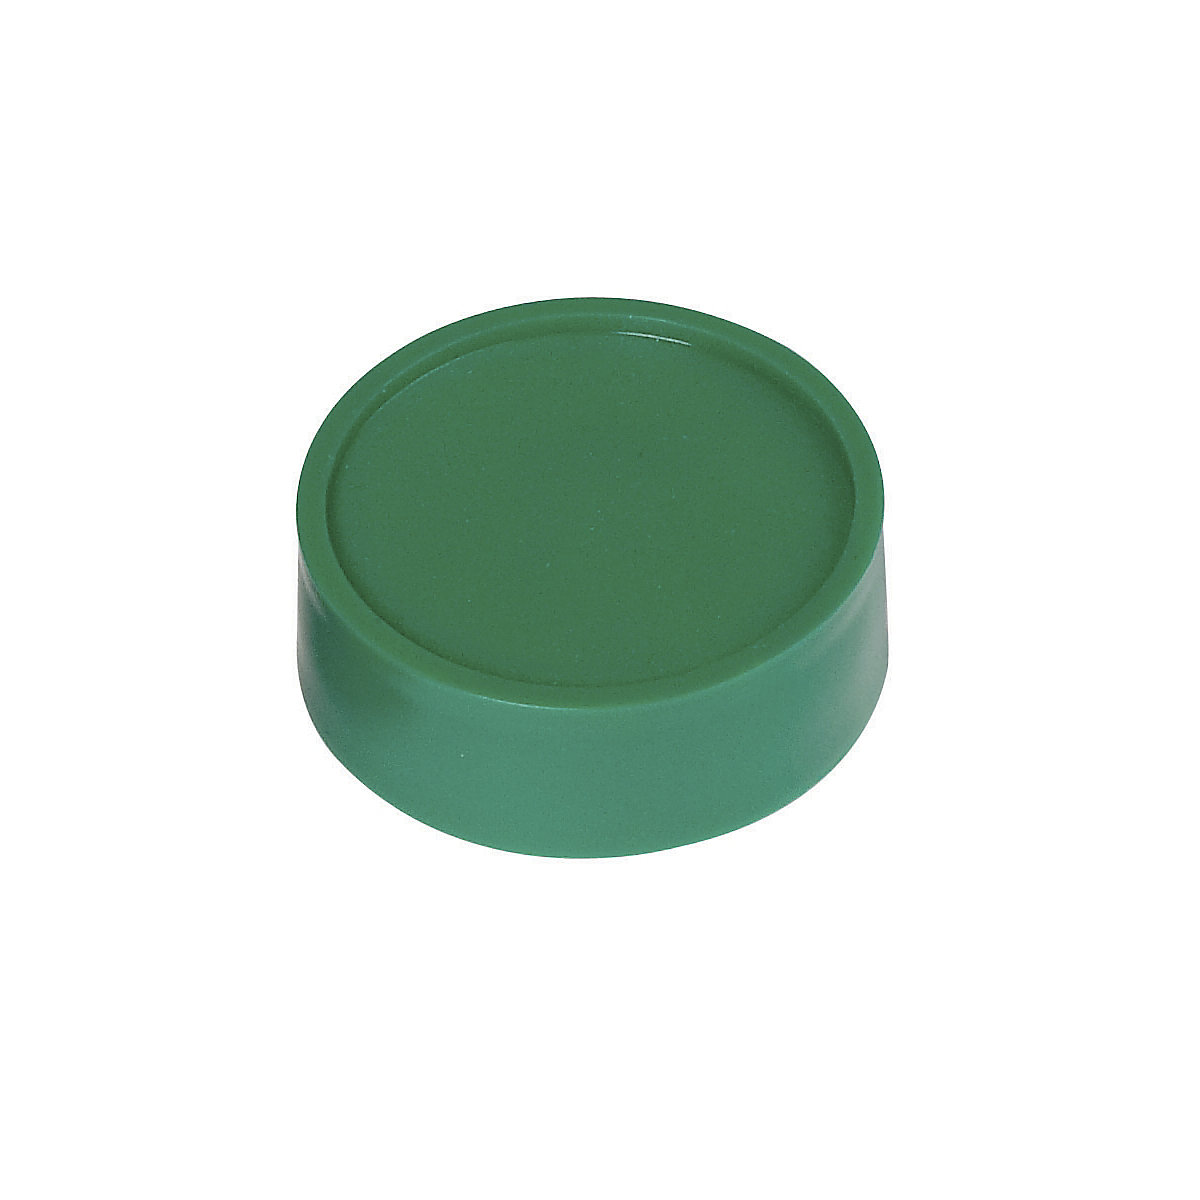 Round magnets – MAUL, Ø 34 mm, pack of 50, green-4